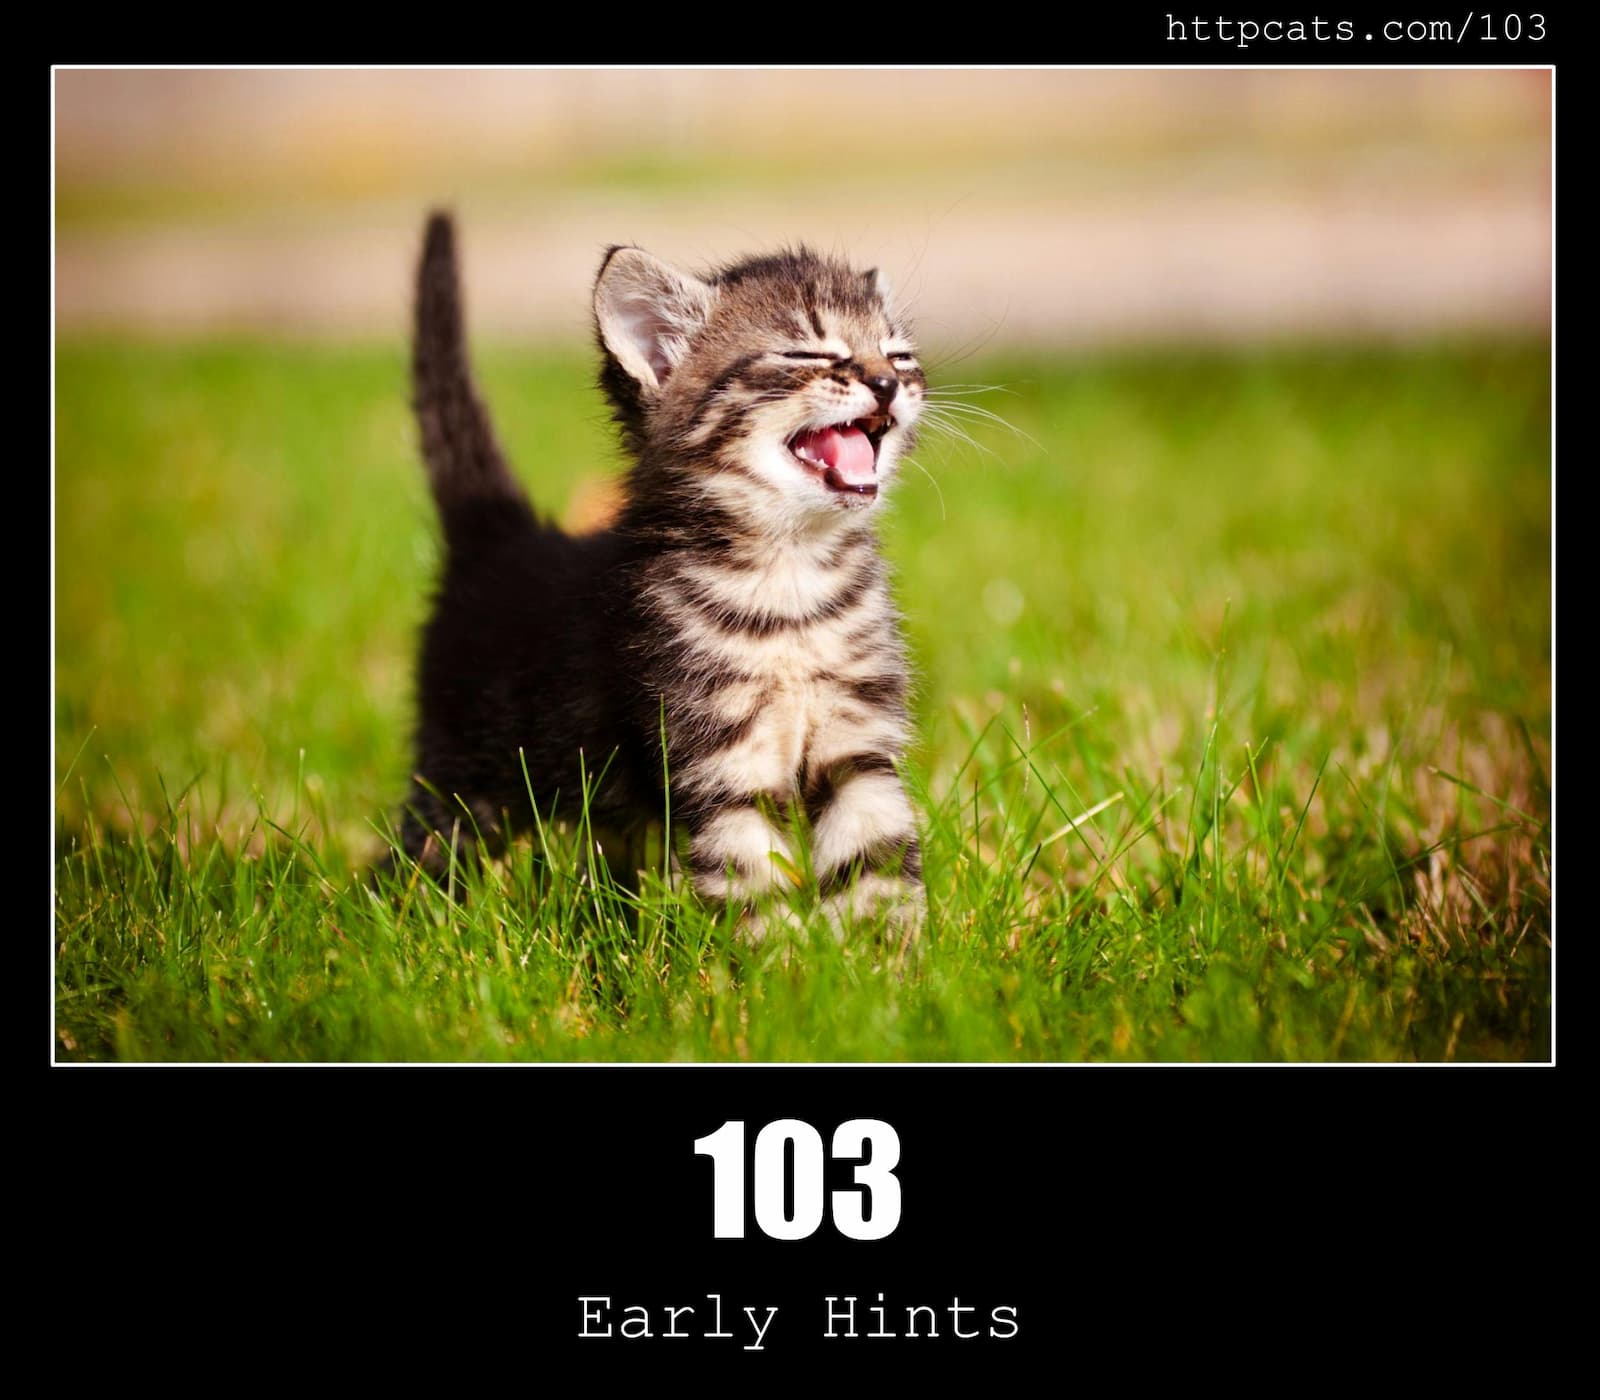 HTTP Status Code 103 Early Hints & Cats